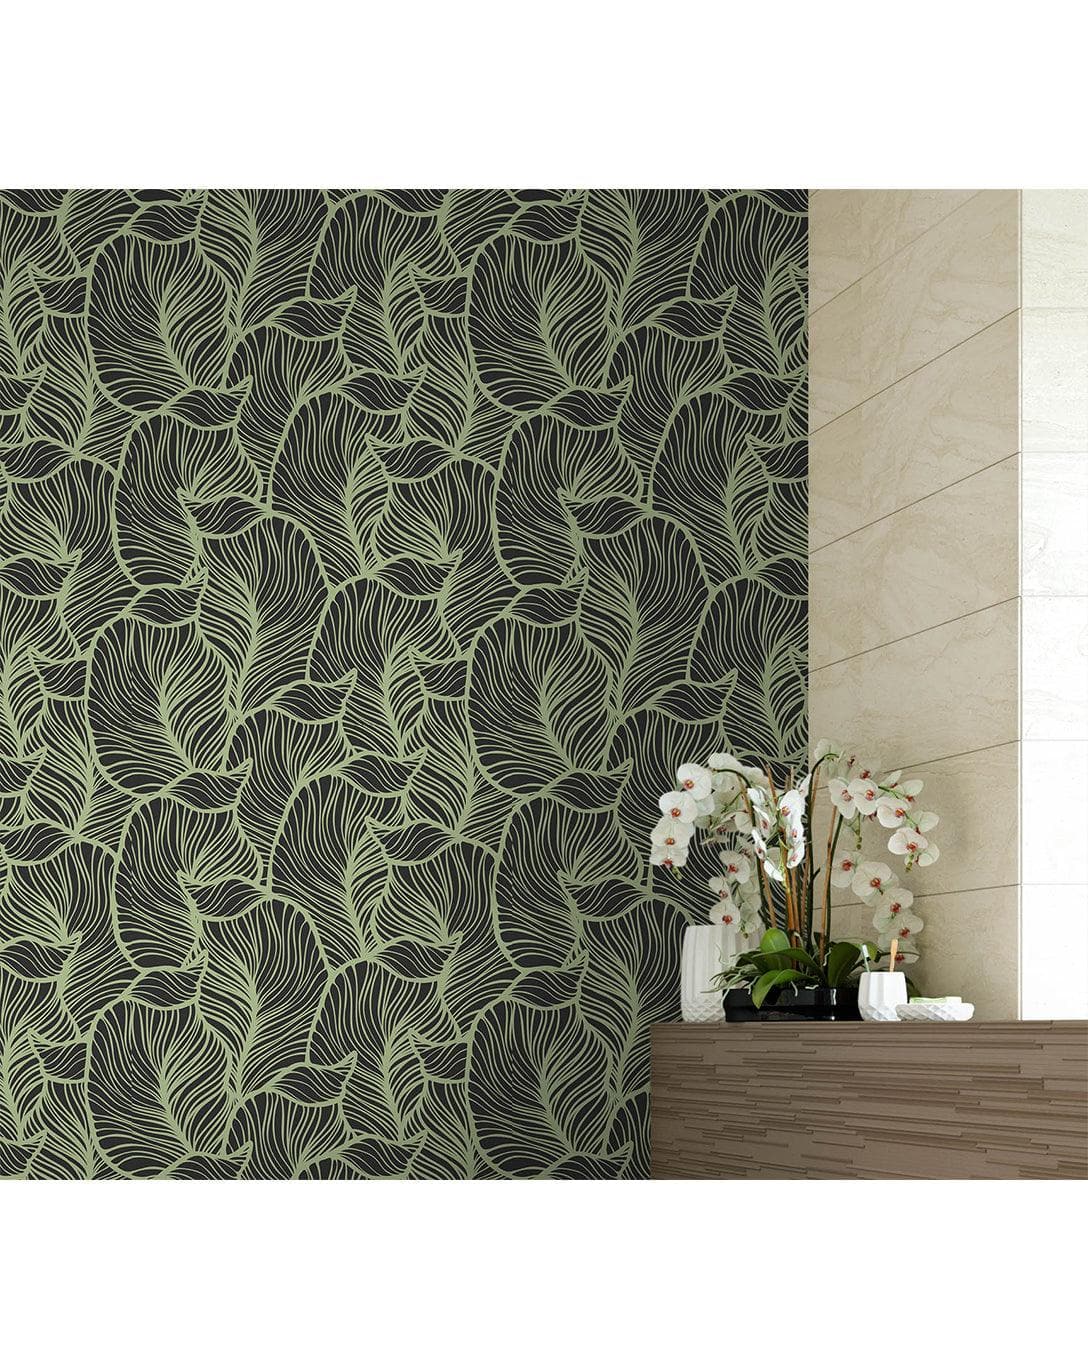 Green Tropical Leaves Removable Wallpaper 